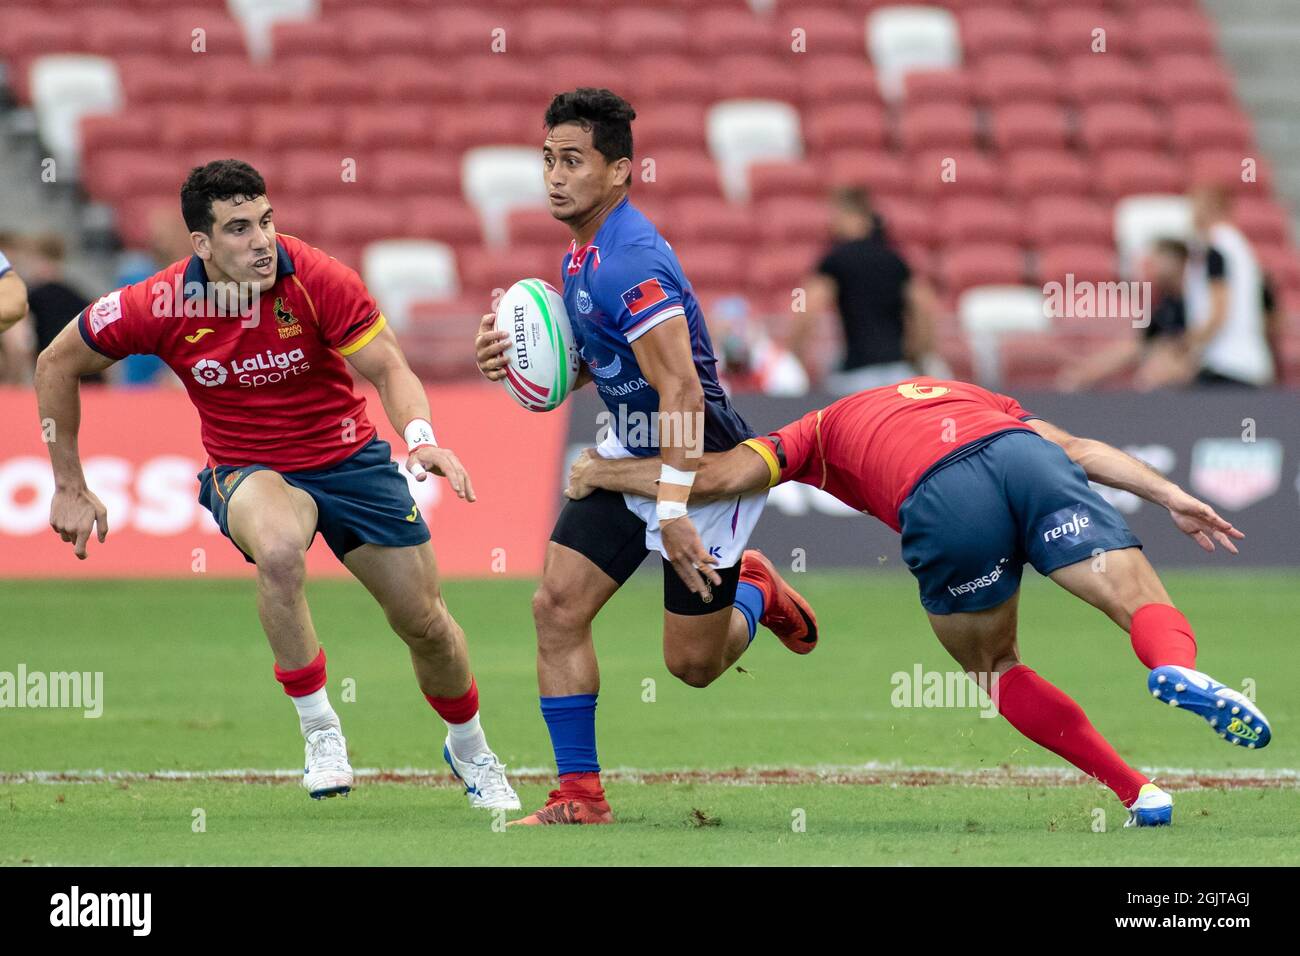 SINGAPORE-APRIL 13:Samoa 7s Team (blue) plays against Spain 7s team (red) during Day 1 of HSBC World Rugby Singapore Sevens on April 13, 2019 at National Stadium in Singapore Stock Photo